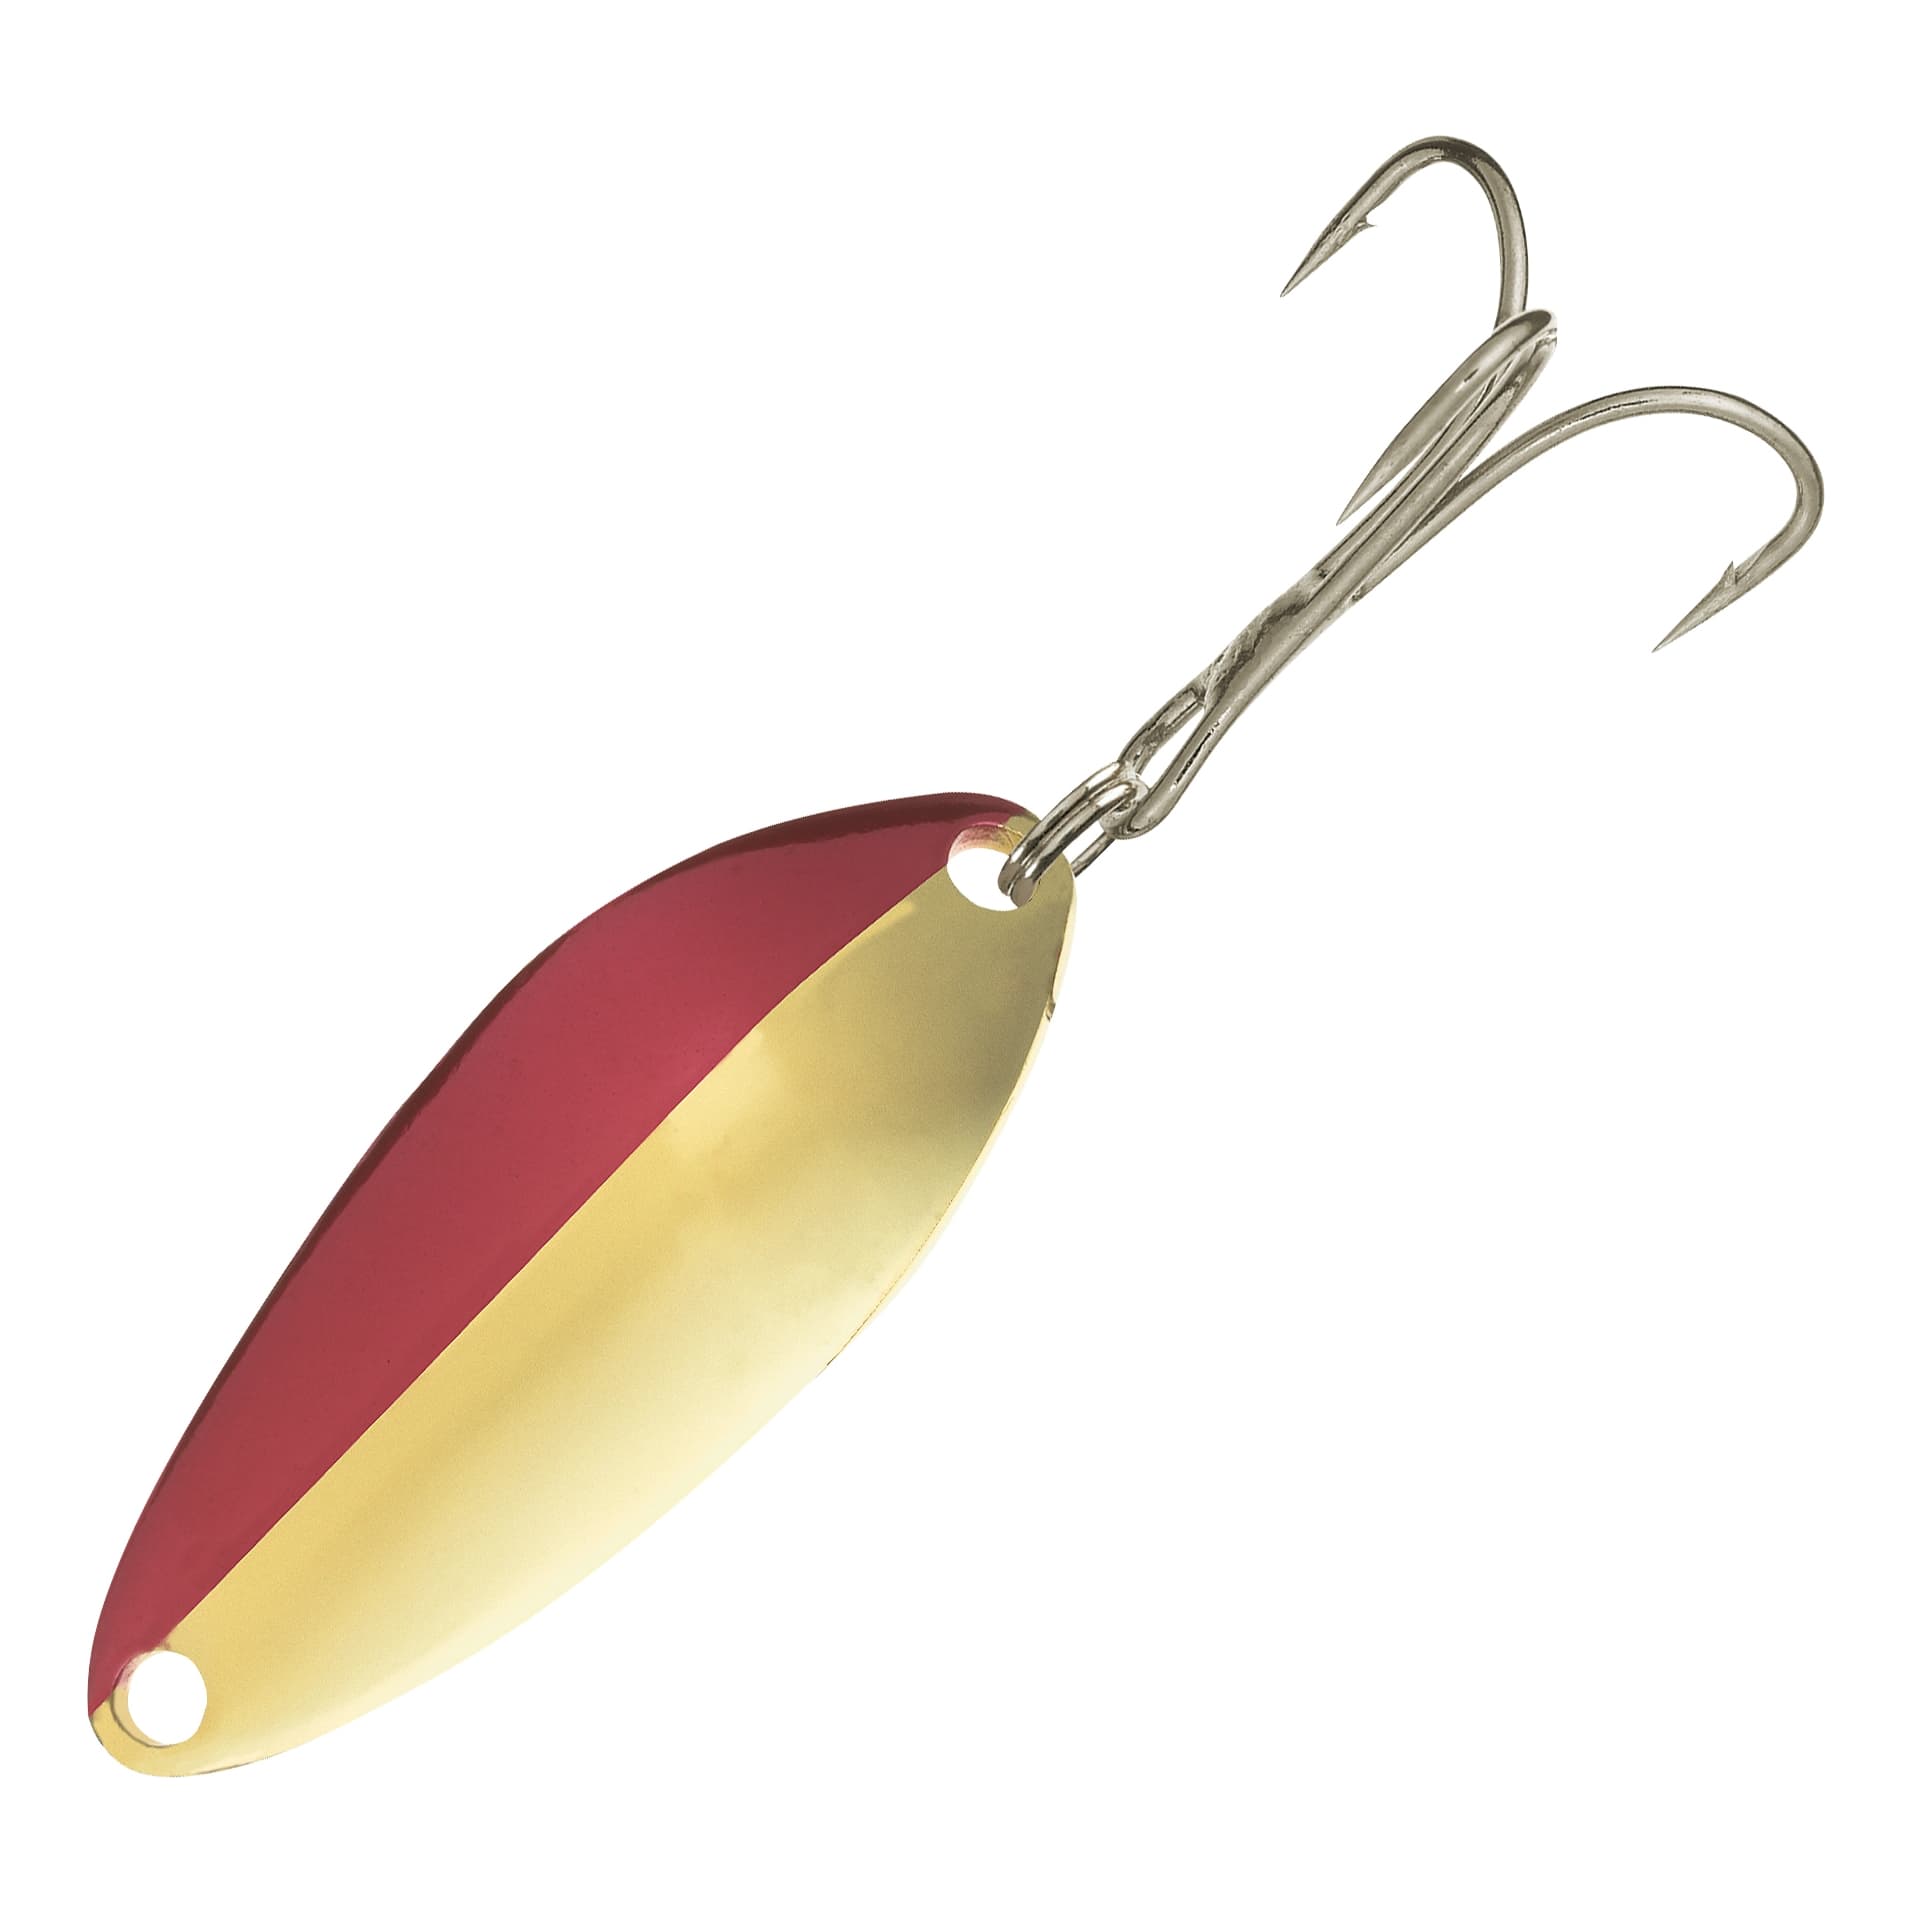 Cabela’s Fisherman Series™ Game Fish Spoon - Gold/Red